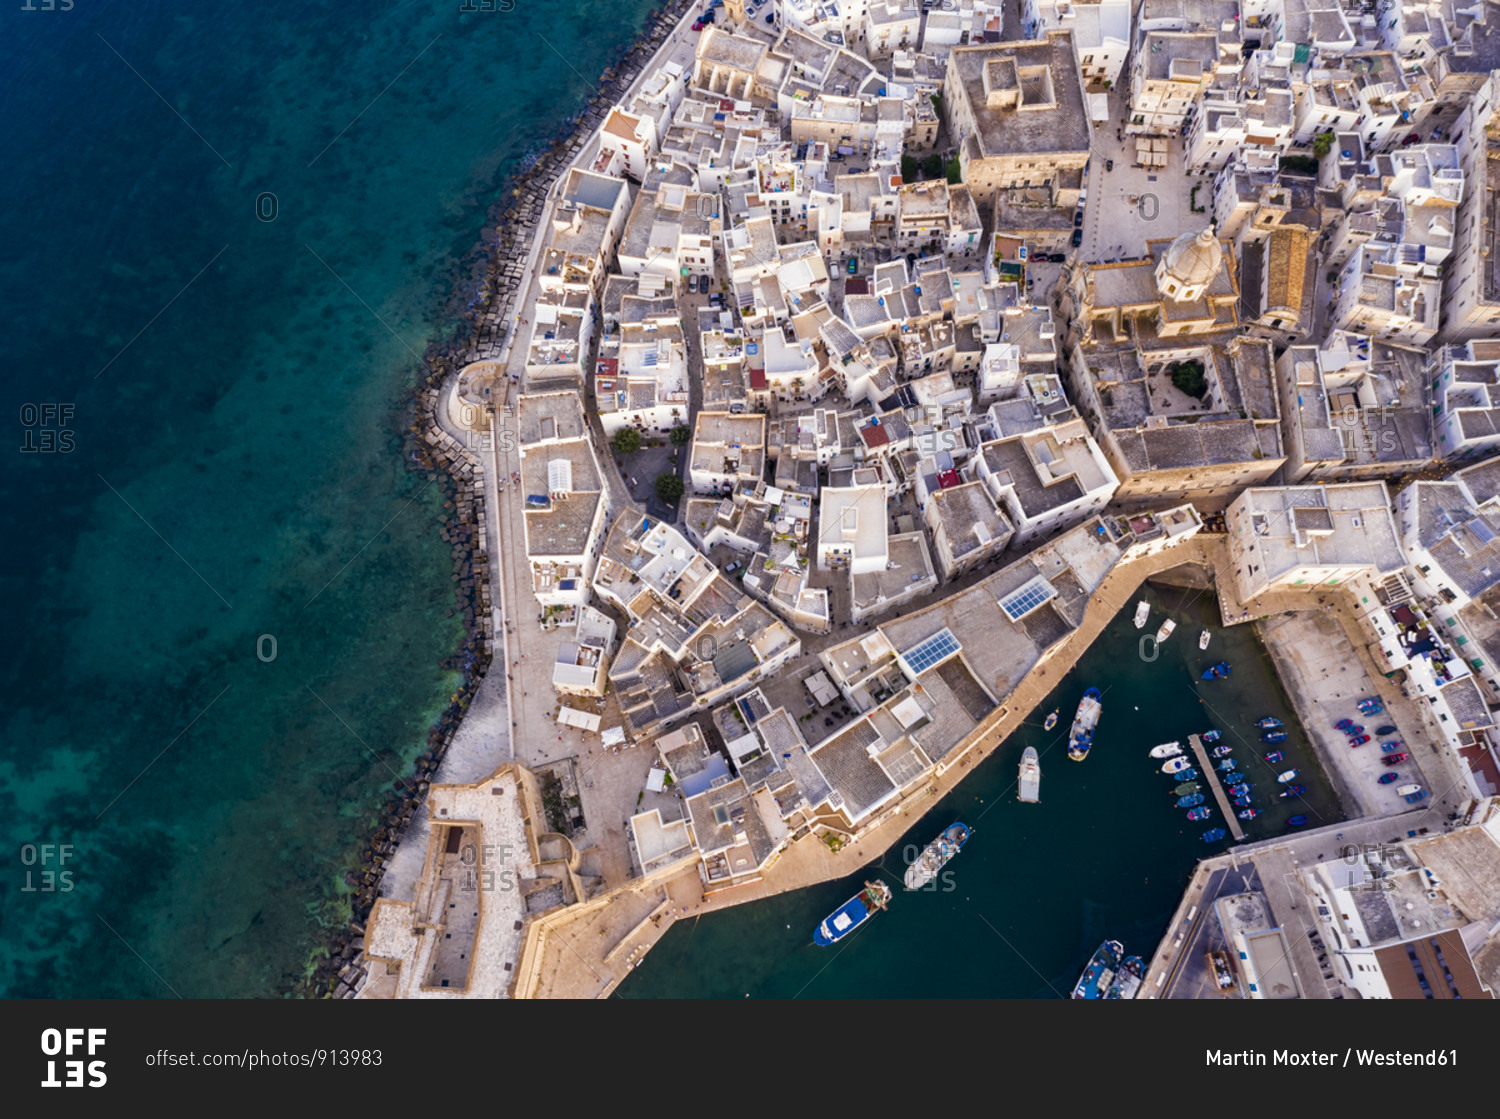 Italy- Apulia- Monopoly- Aerial view of sea and old town at sunset